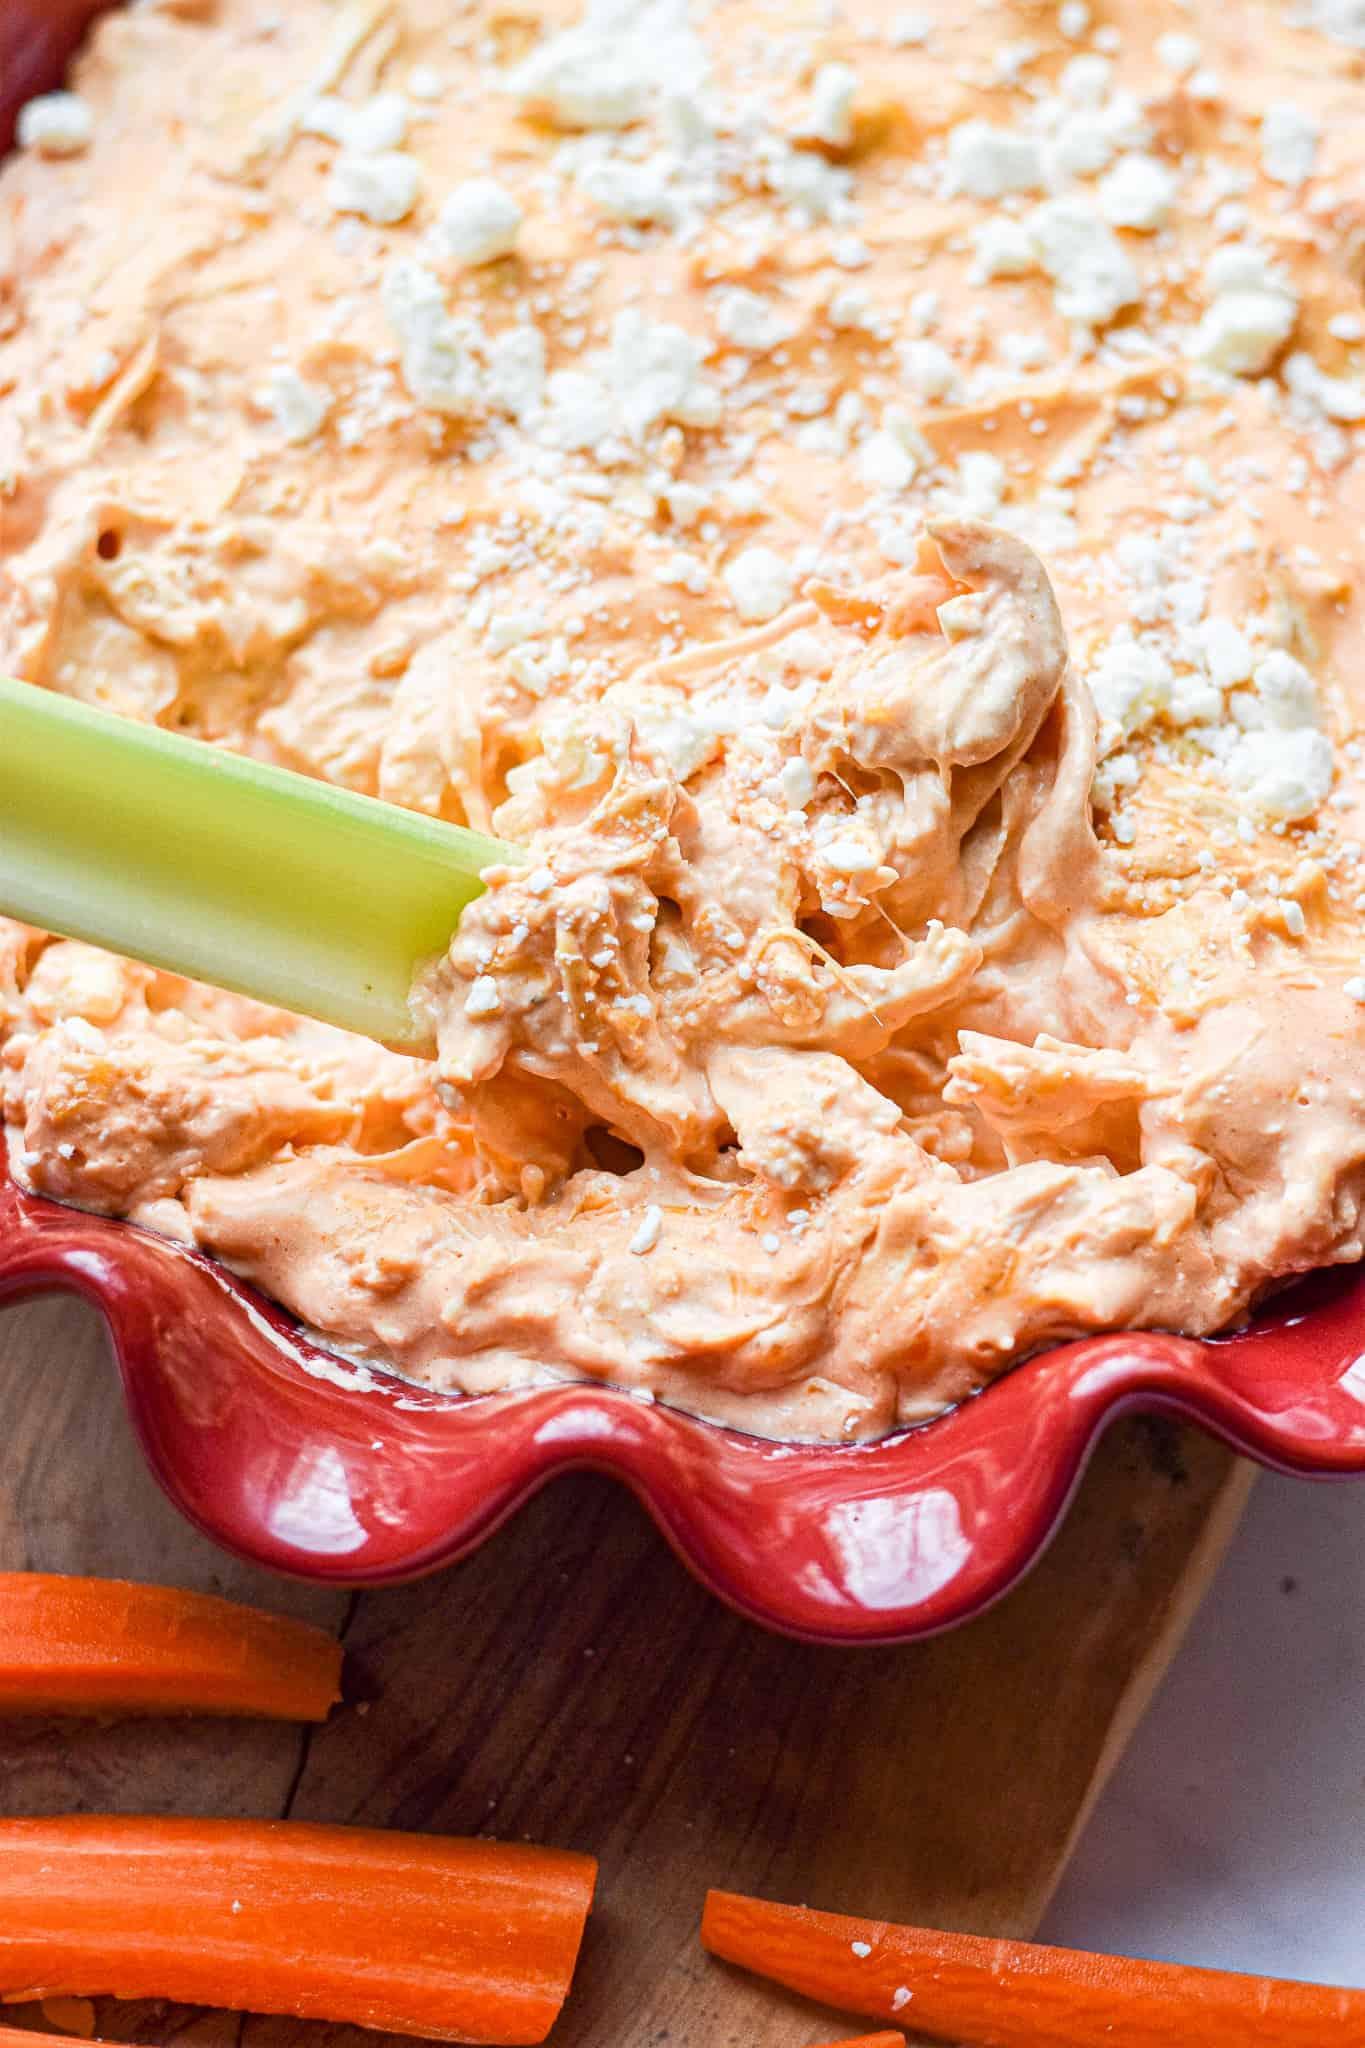 A celery stick is being dipped into the Instant Pot Buffalo Chicken Dip